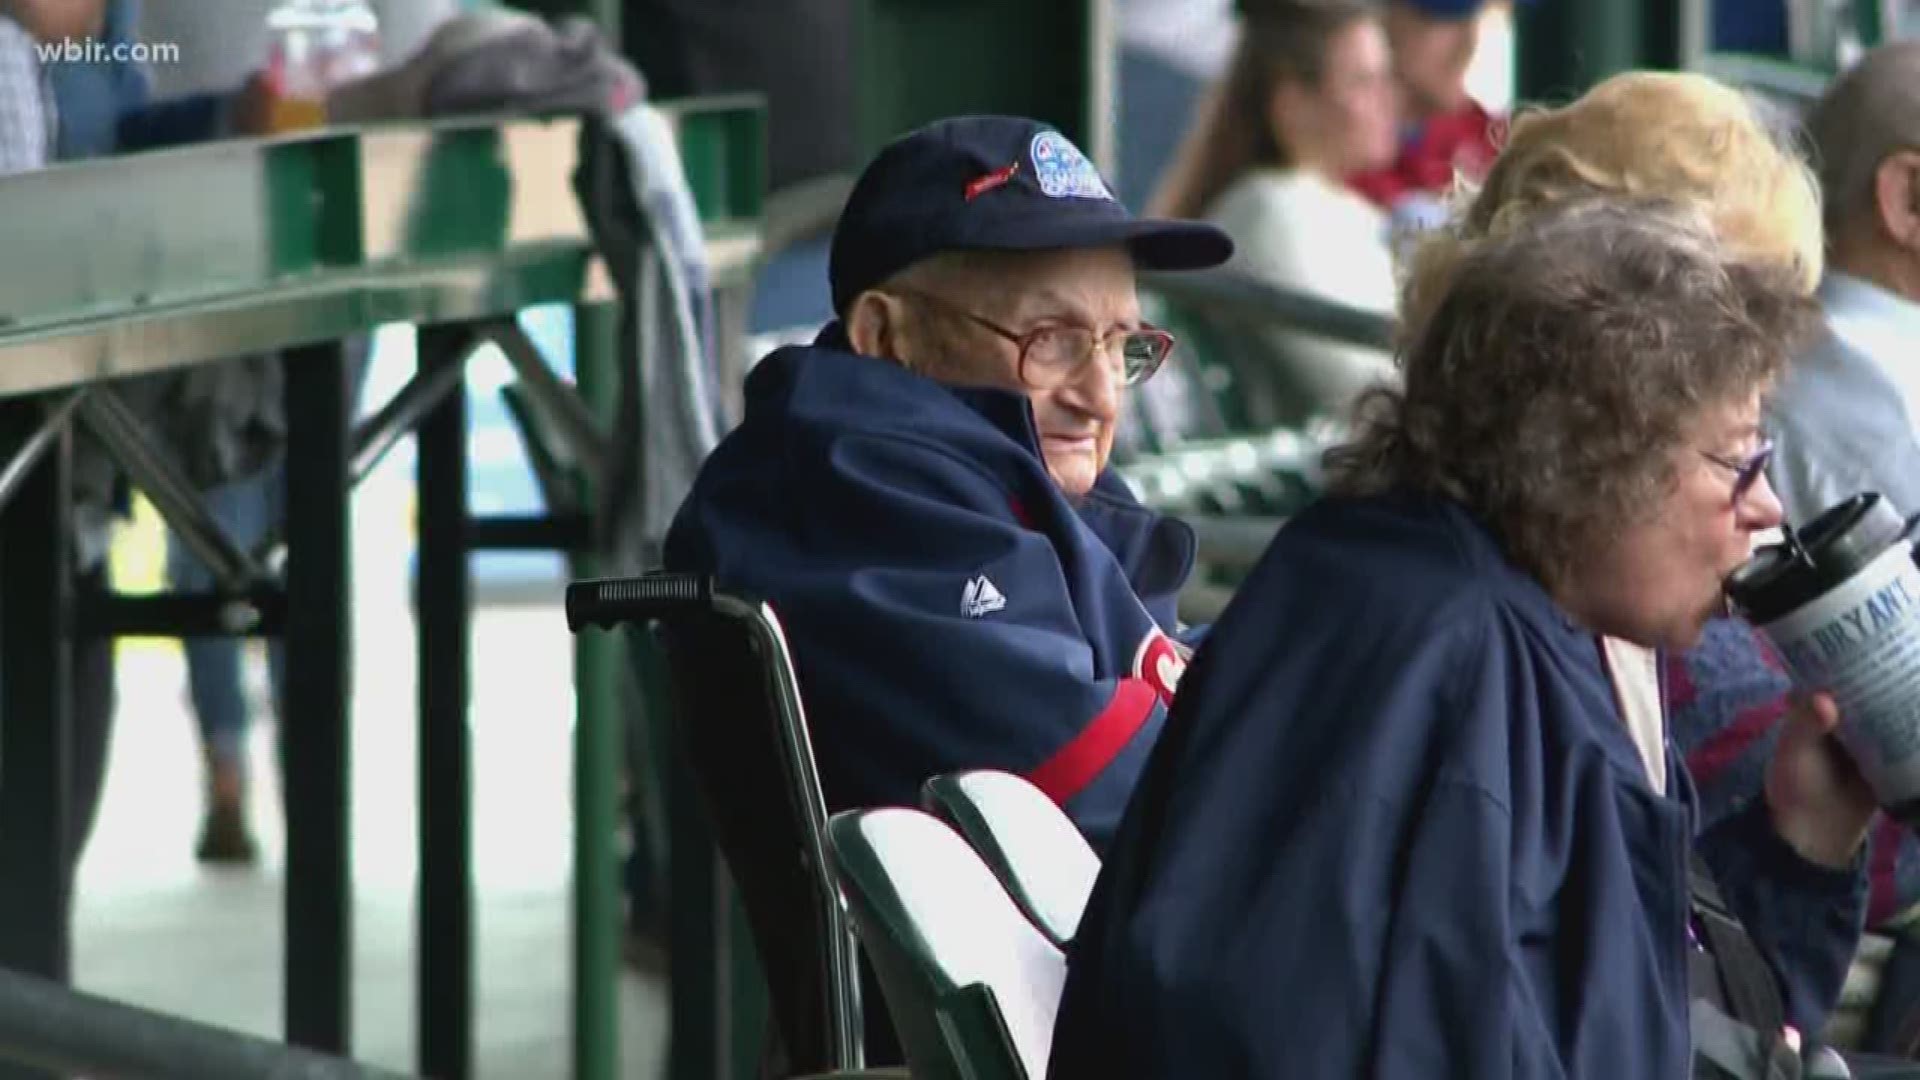 Jim Ball was a fixture at Smokies games since the beginning. The 98-year-old Navy vet was there on Opening Day in 2000 when they played their first game in Kodak.